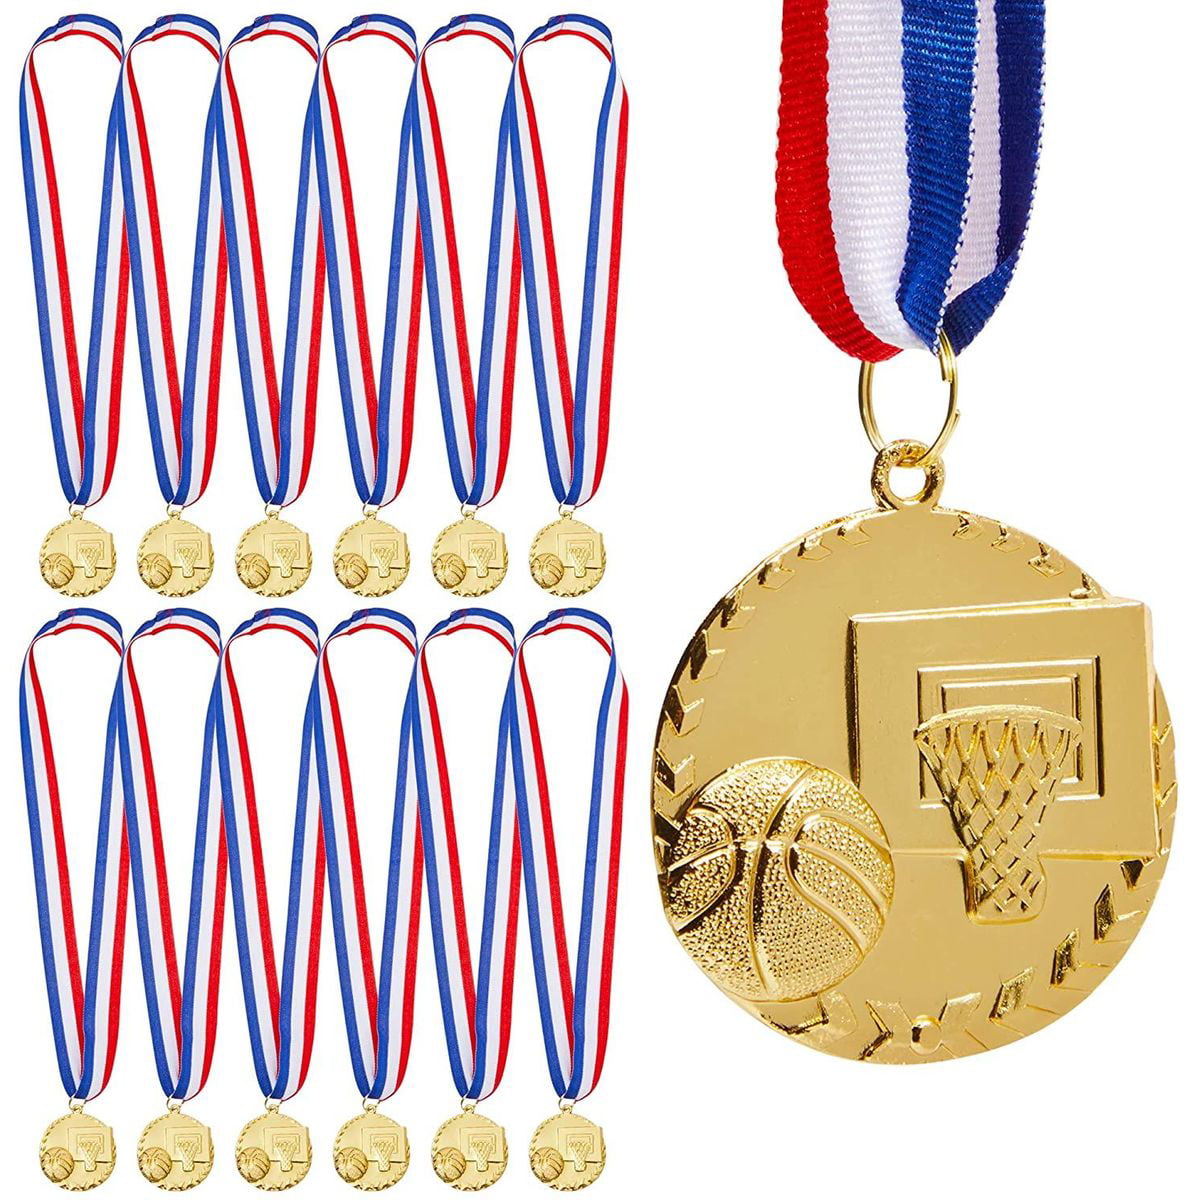 10 x Gold,Silver,Bronze Junior Football Metal Medals & RIBBONS Man of the Match 